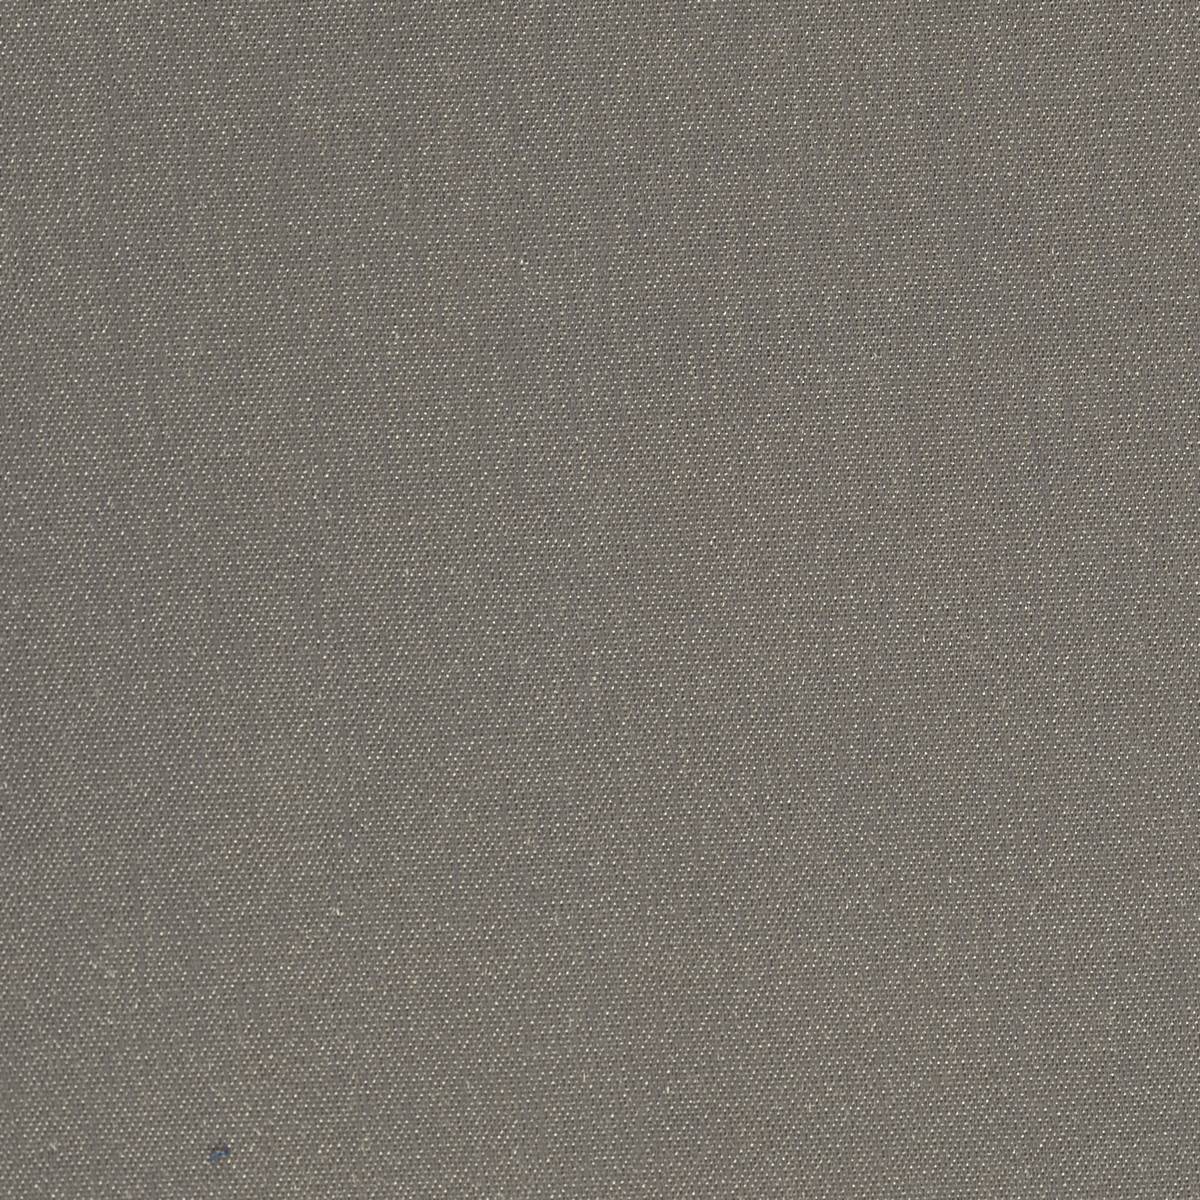 Spectro Shale Fabric by Harlequin